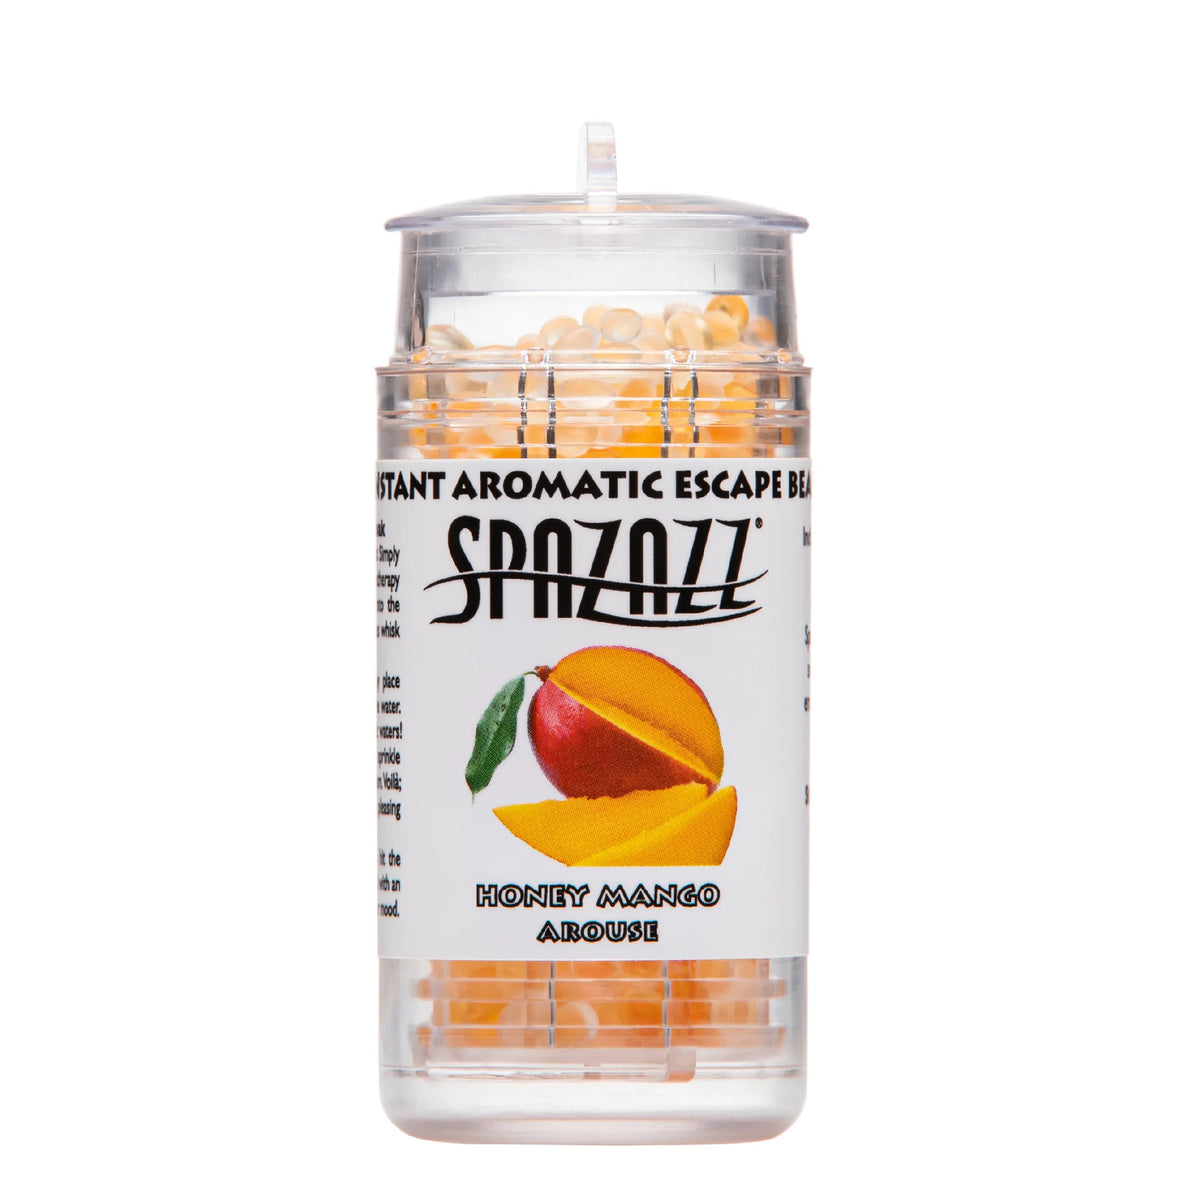 Spazazz Spa Scents - Aromatherapy Canisters Arouse